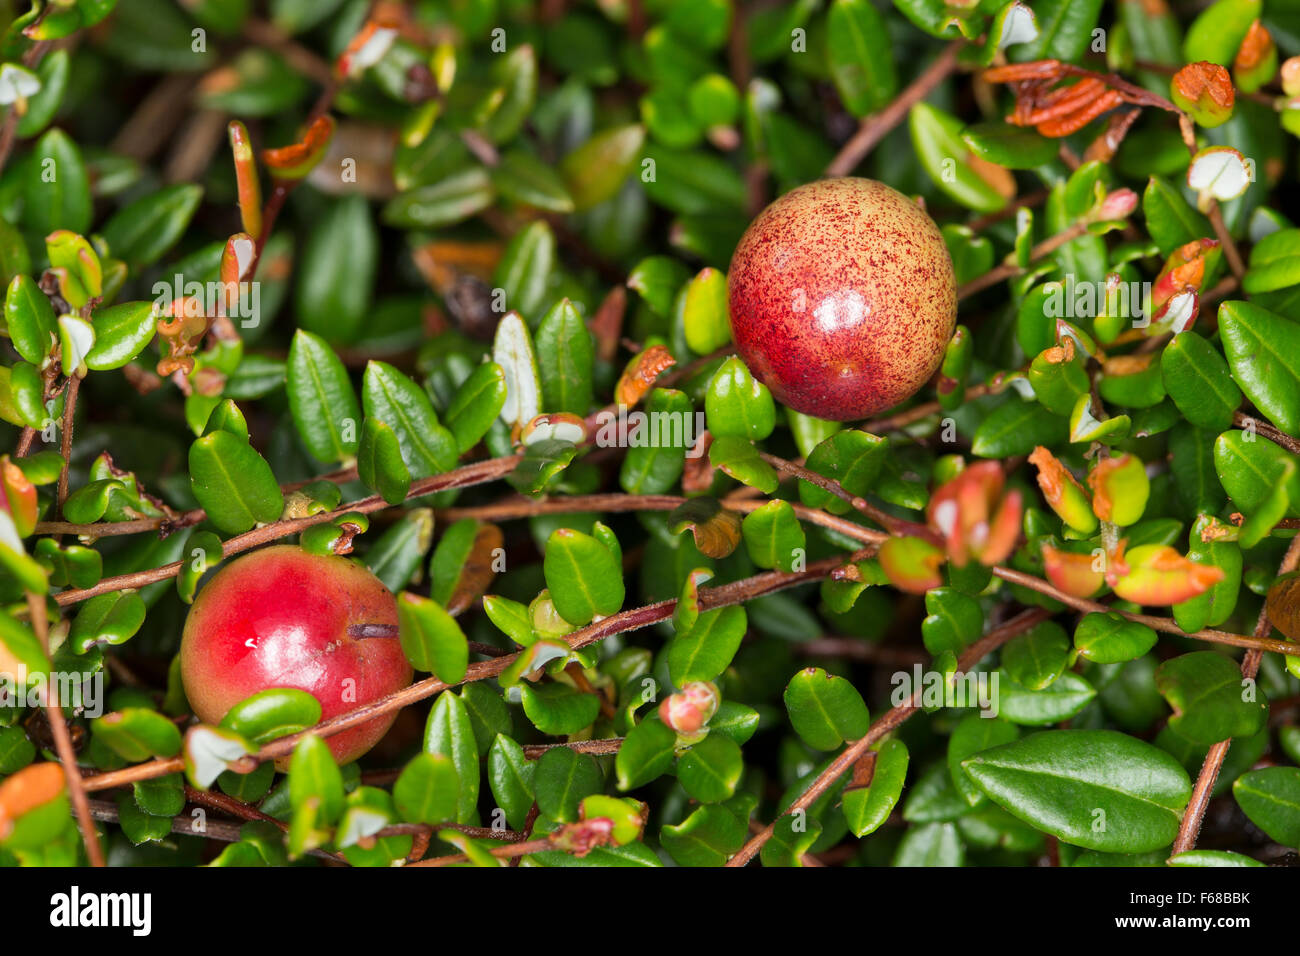 Wild Cranberry Plant High Resolution Stock Photography and Images - Alamy